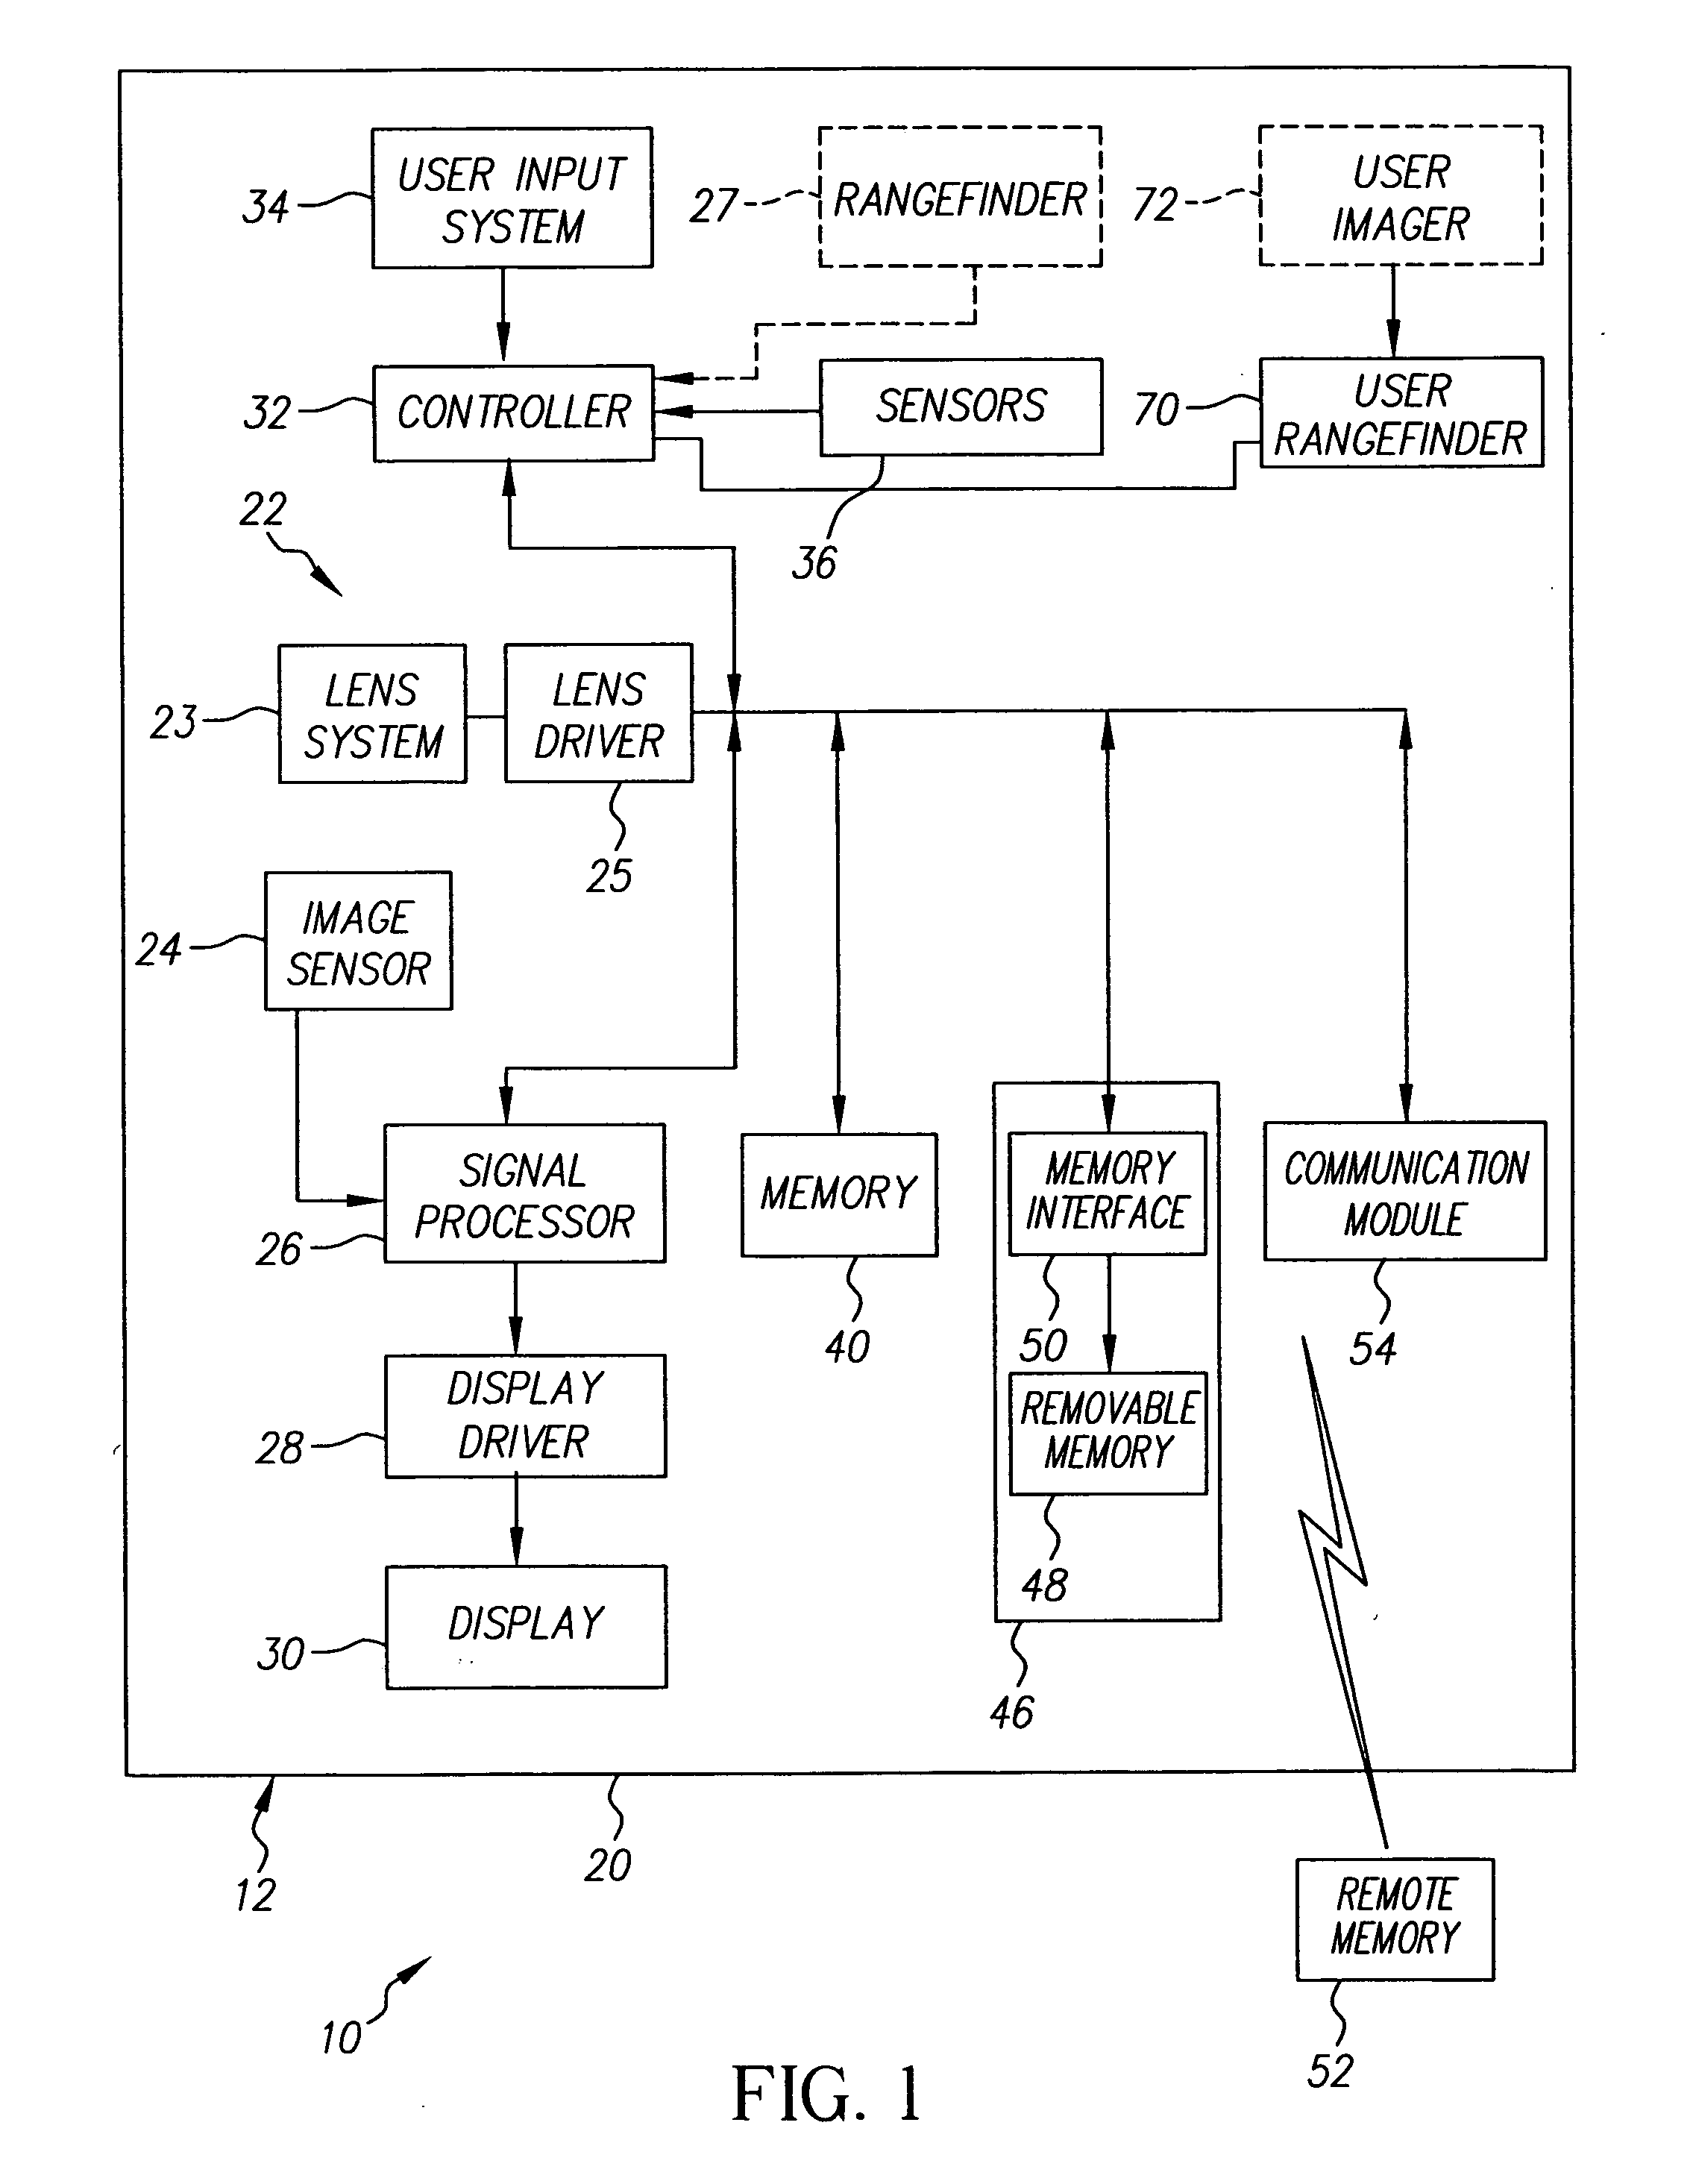 Control system for an image capture device